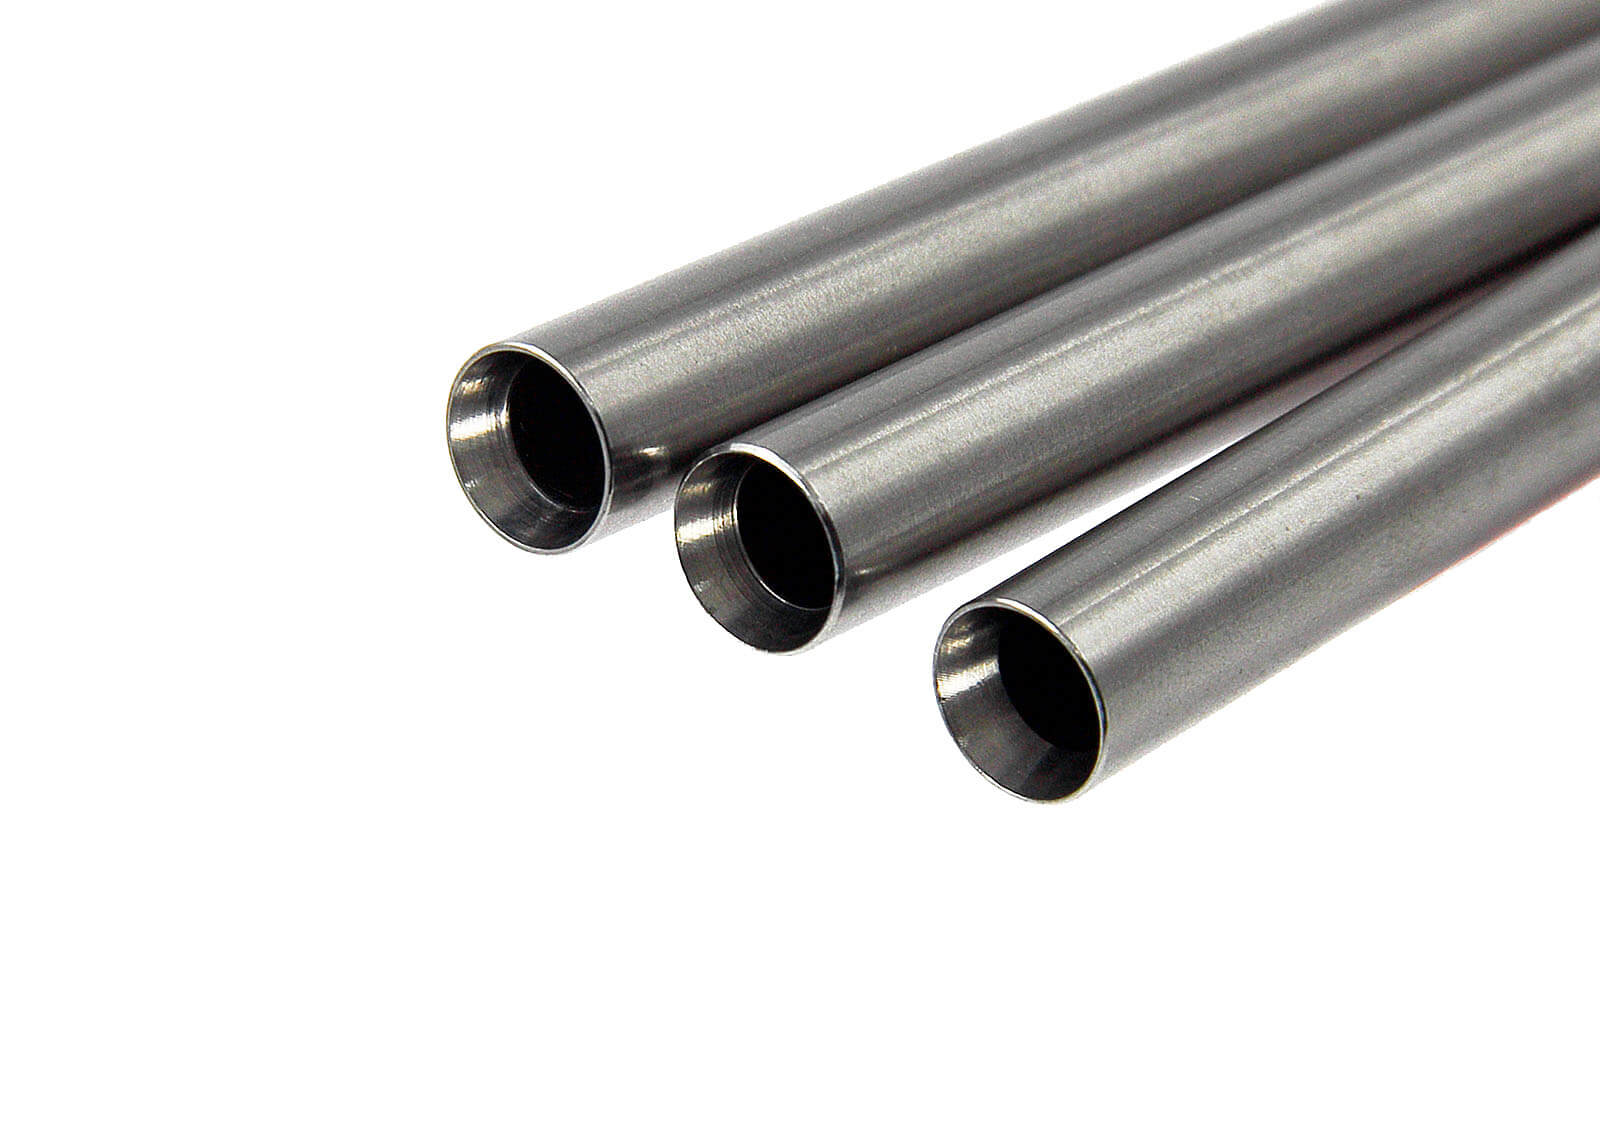 Stainless Steel 6.03mm Precision GBB Inner Barrel 138mm - Modify Airsoft Parts